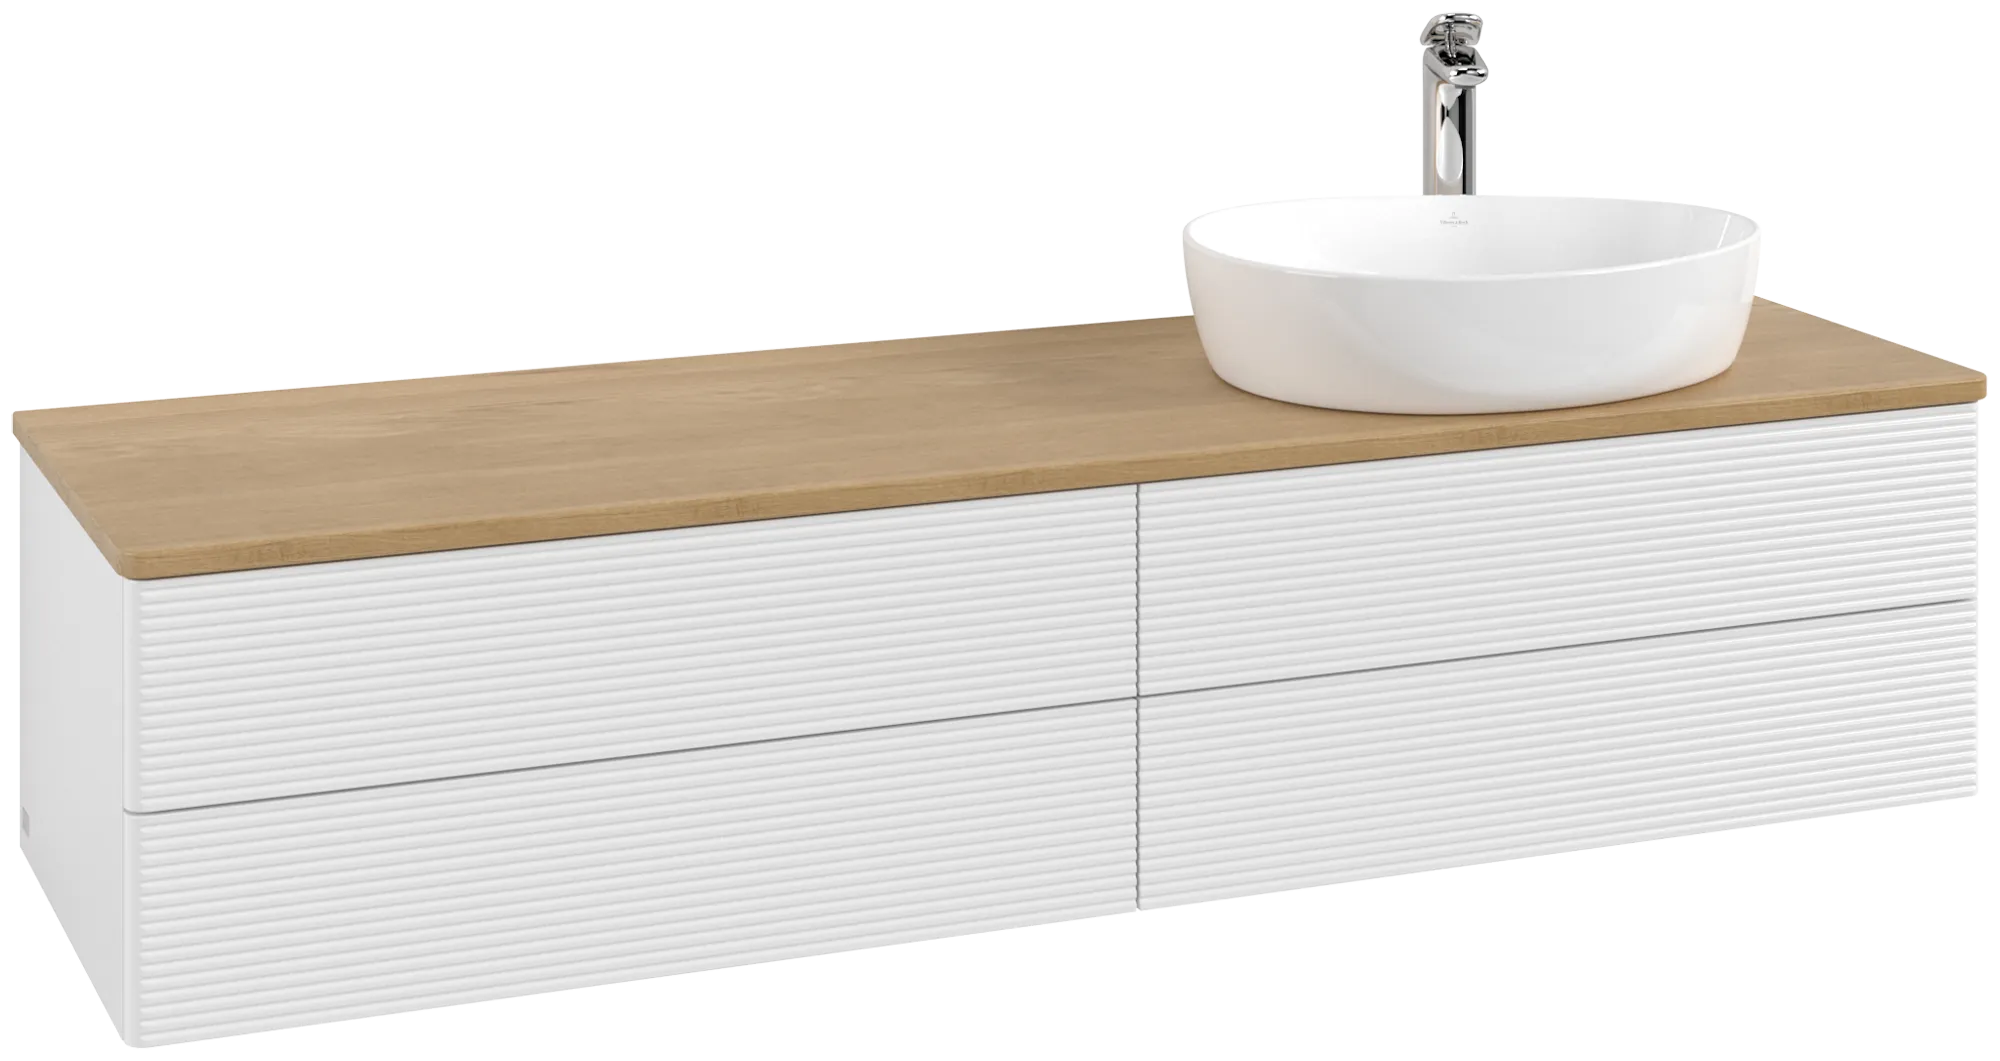 Picture of VILLEROY BOCH Antao Vanity unit, 4 pull-out compartments, 1600 x 360 x 500 mm, Front with grain texture, Glossy White Lacquer / Honey Oak #K27151GF